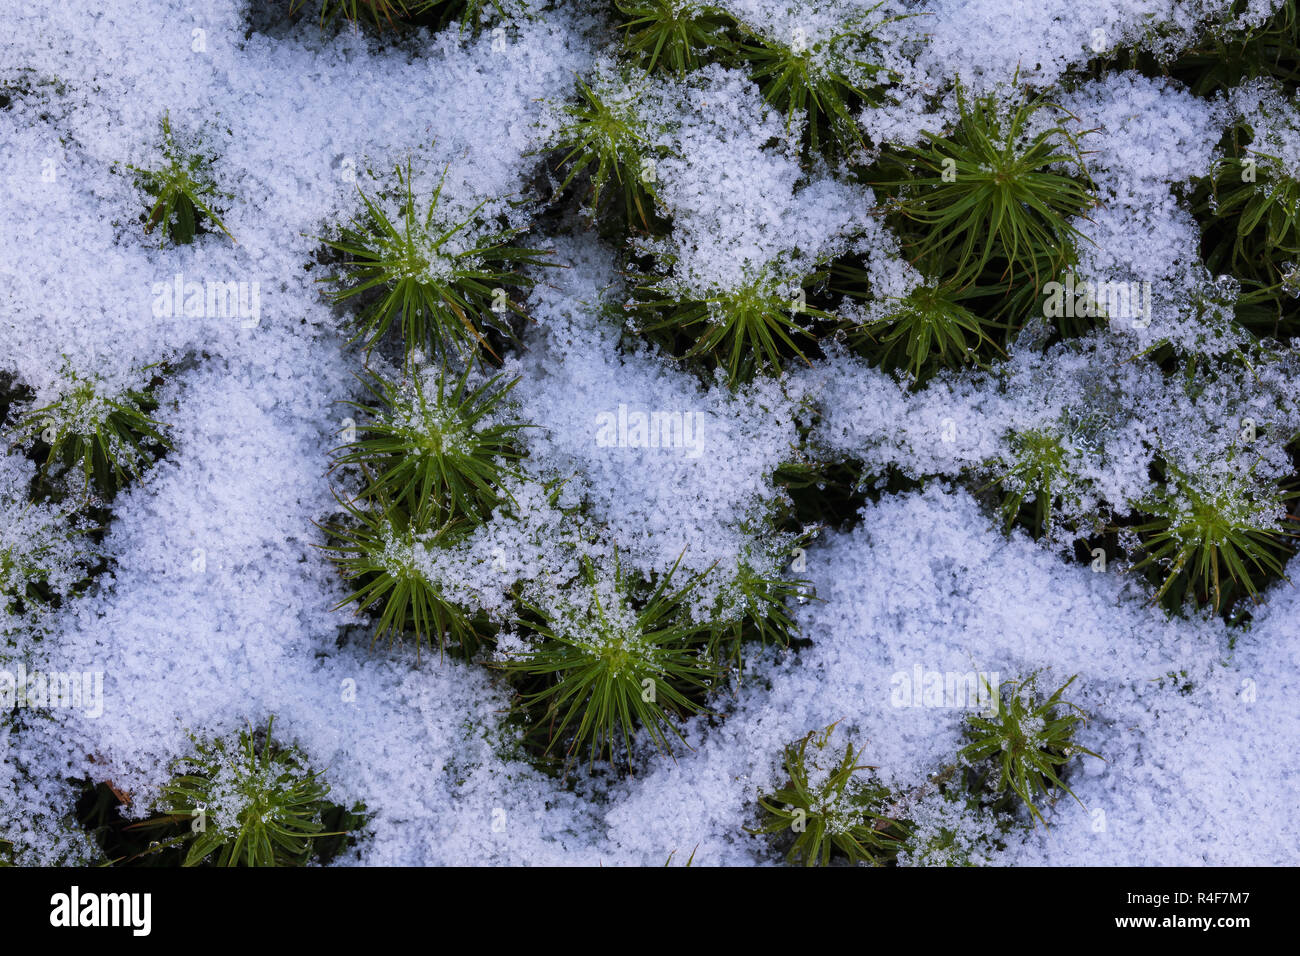 Close-up image of Hair-cap Moss partially covered with snow Stock Photo